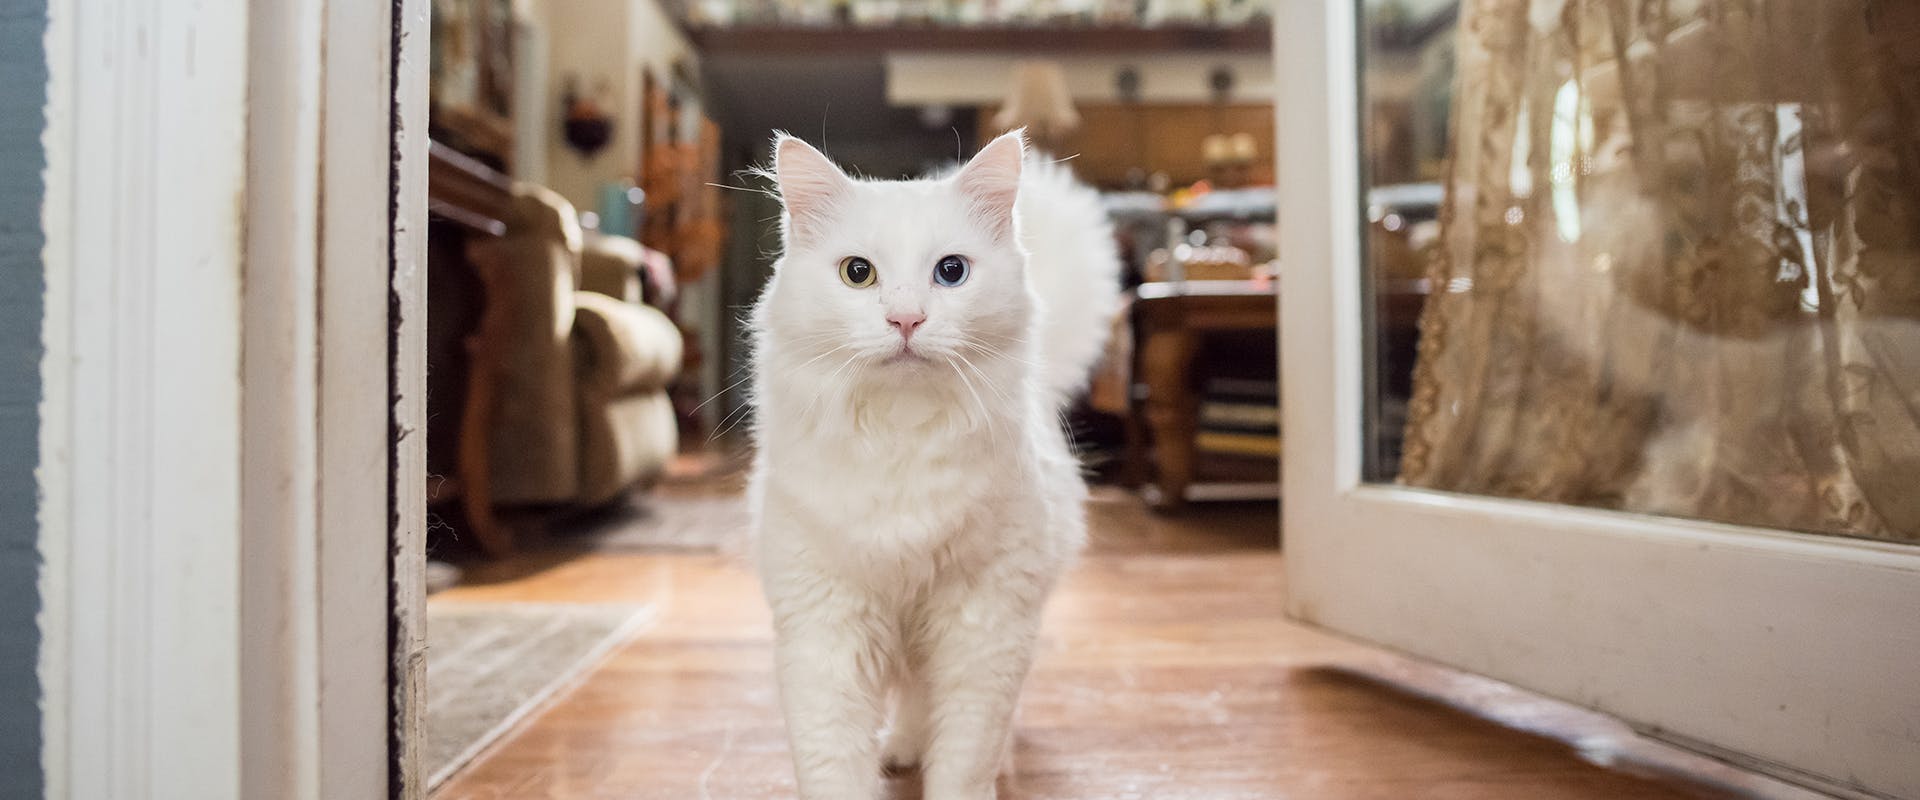 A white cat in a home, walking through a doorway